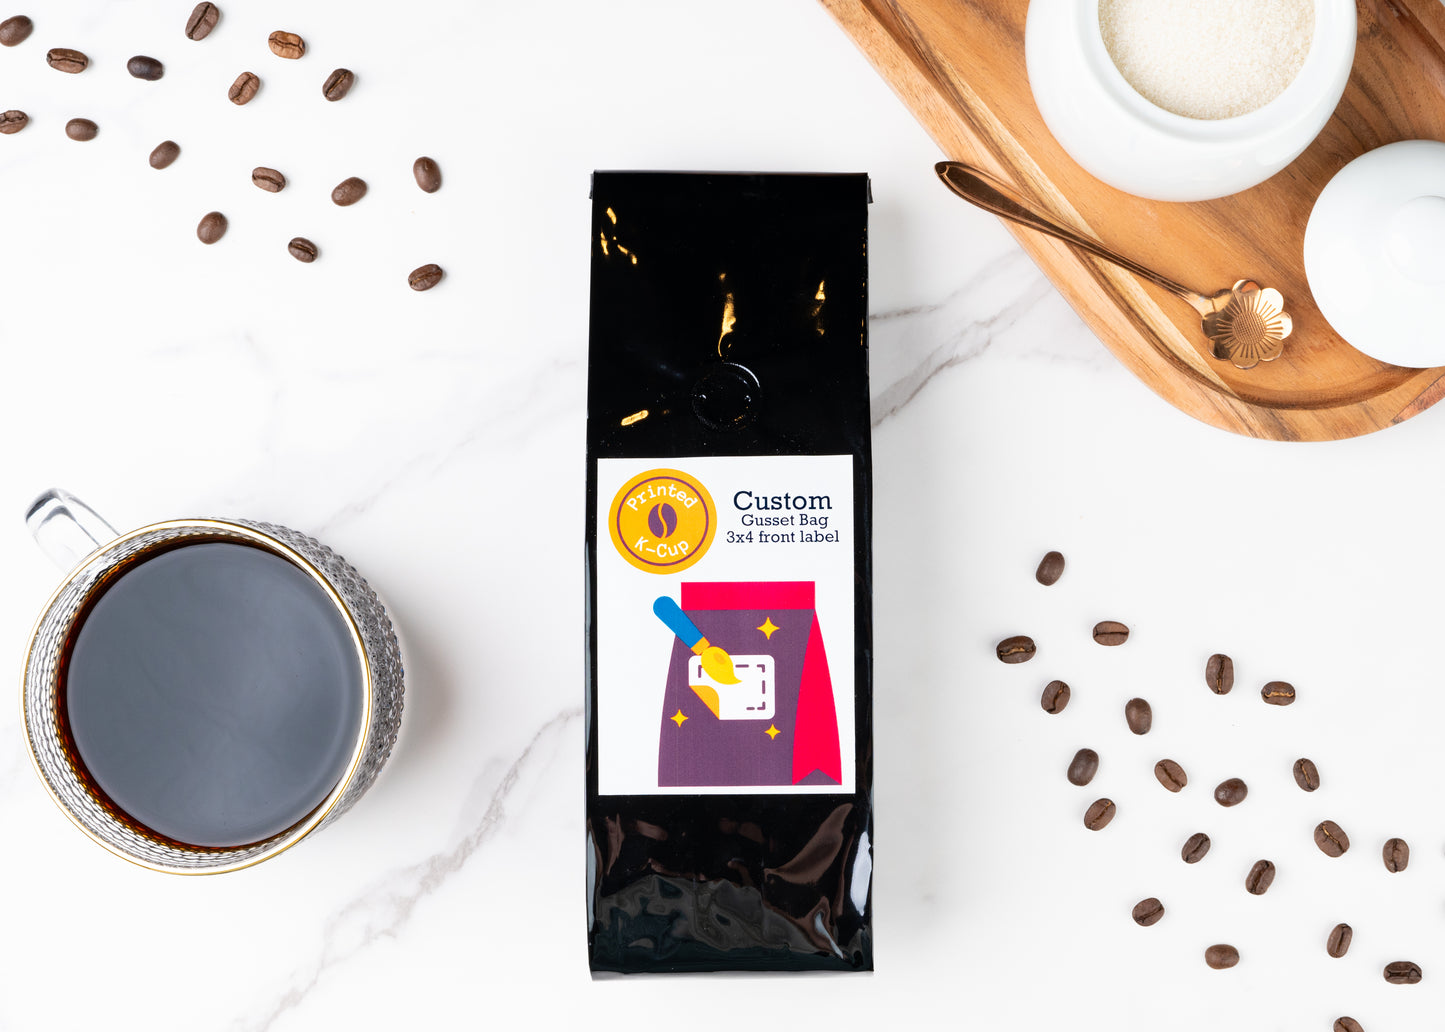 Bagged Coffee with Custom Label